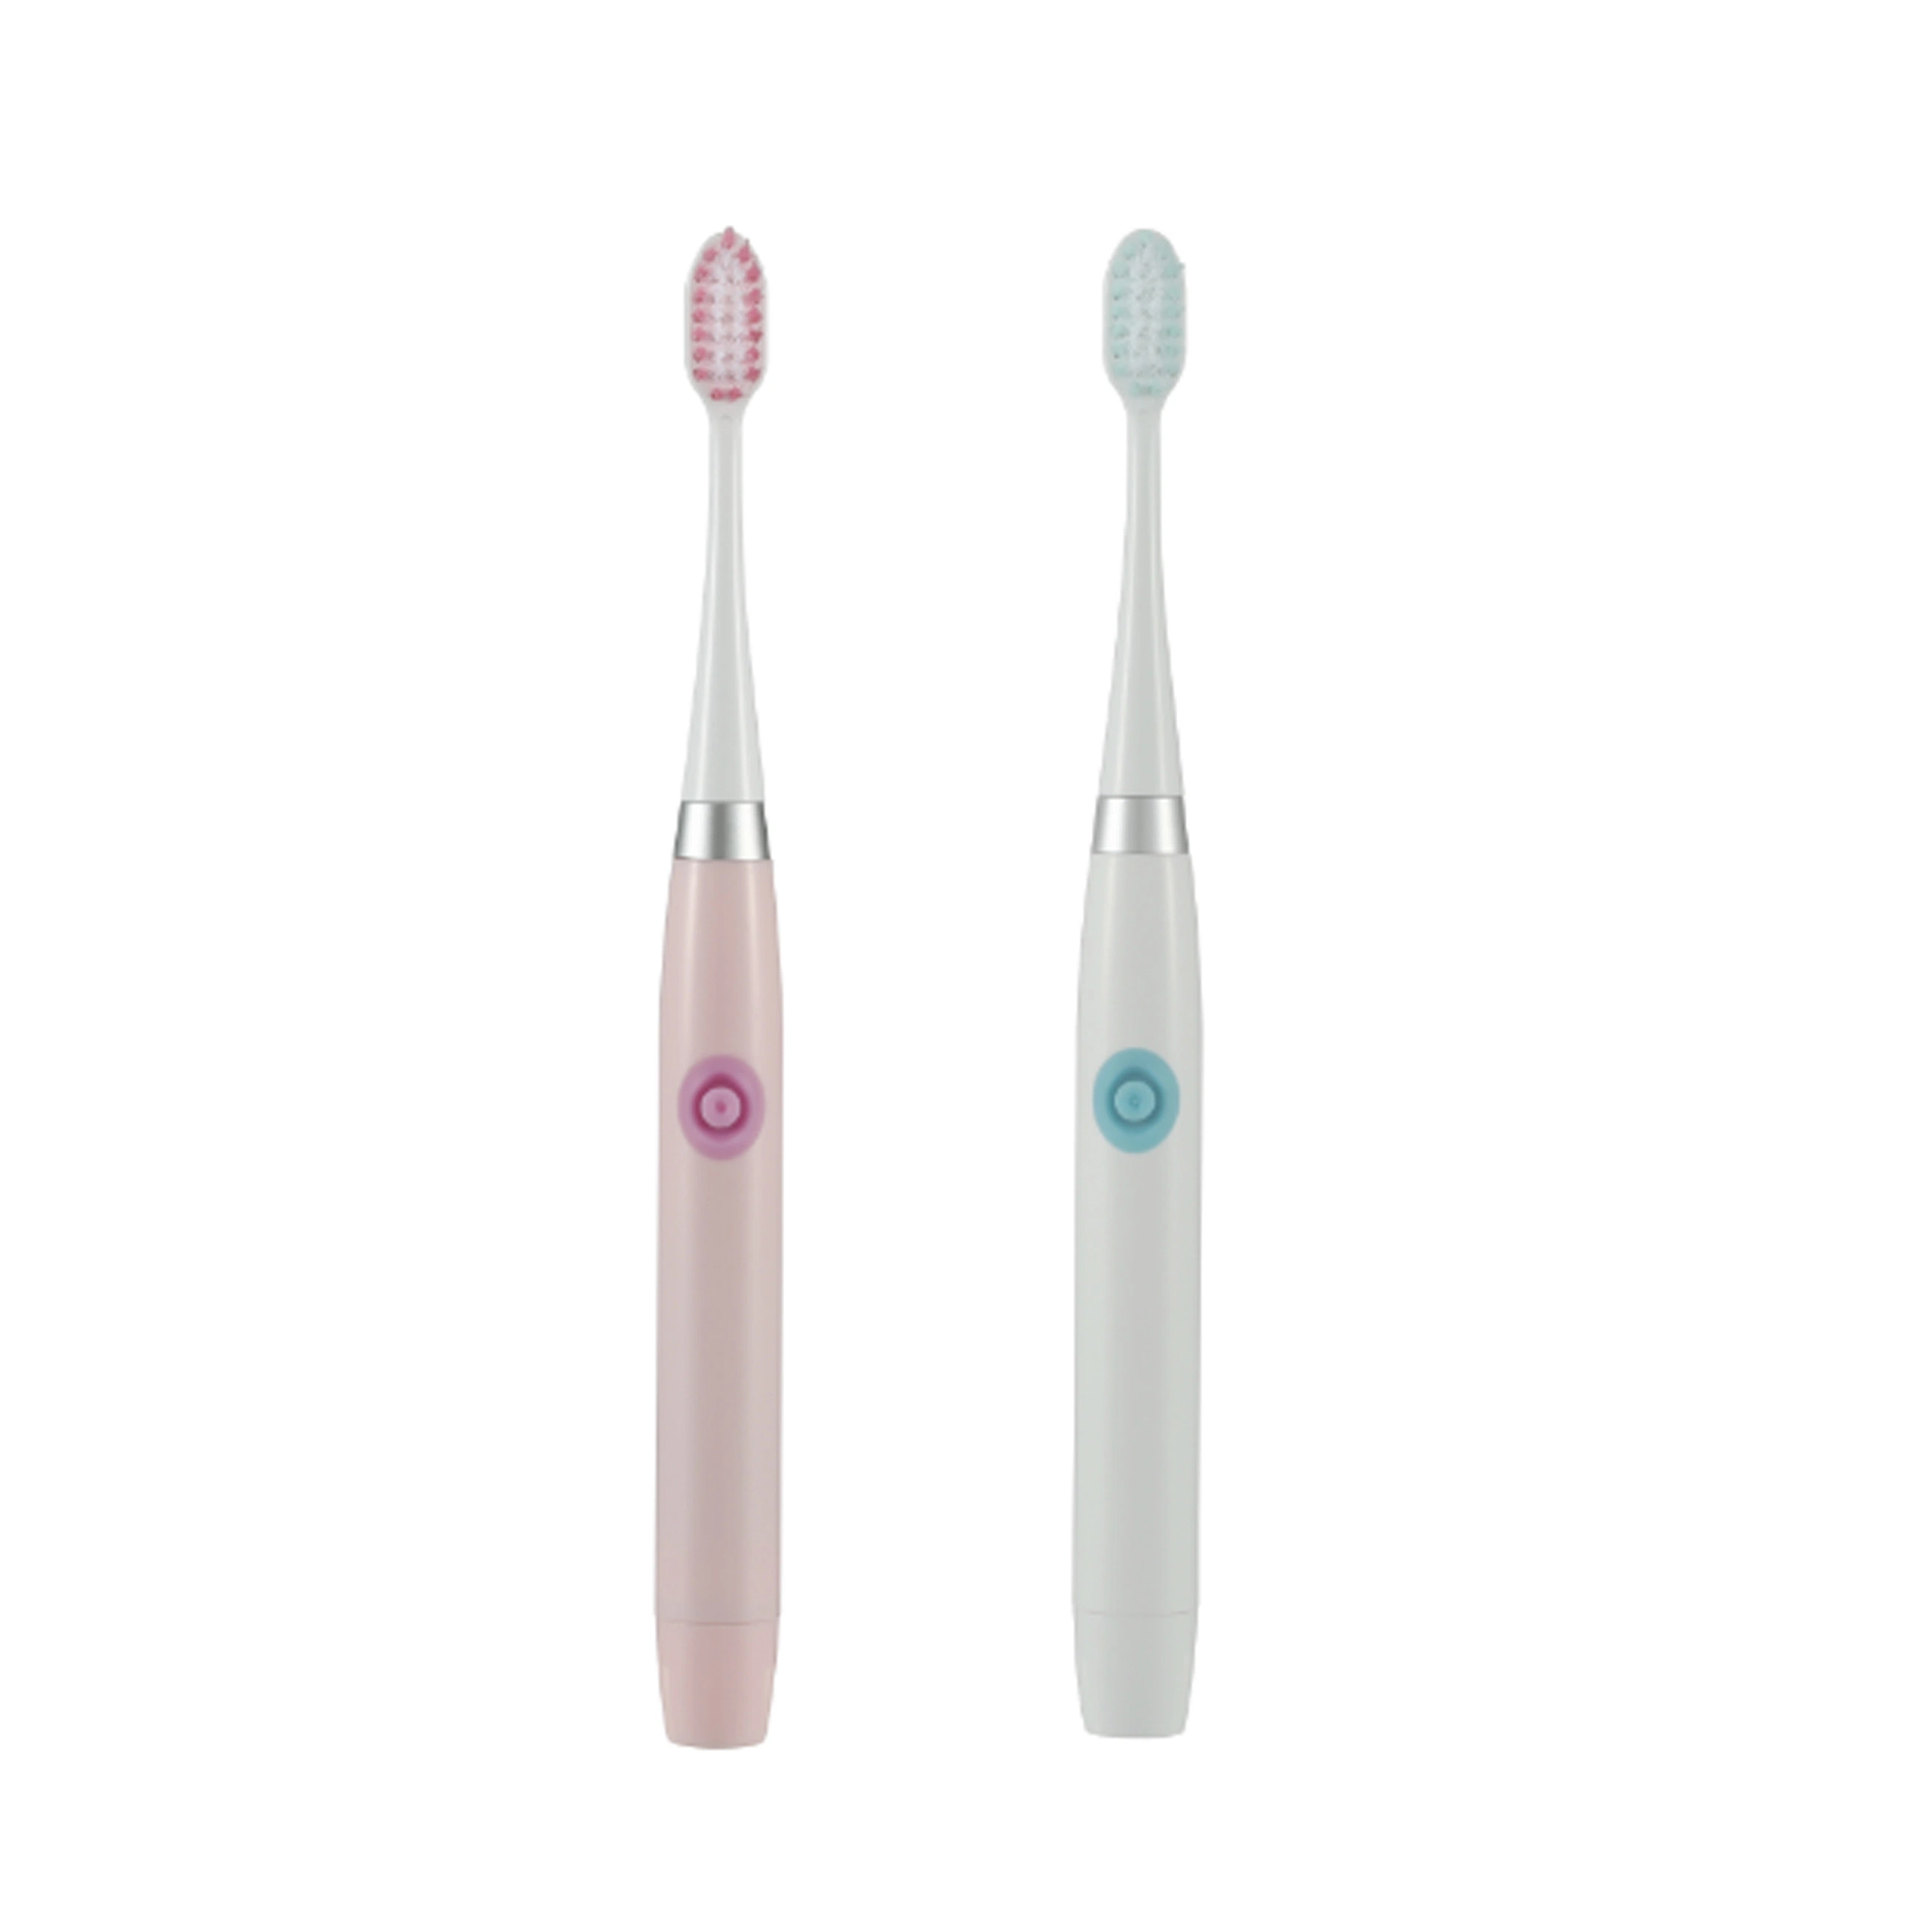 Jssan Js103 Battery Powered Electric Toothbrush Is Very Cheap Electronic Toothbrush Small Size Easy to Carry Power Toothbrush